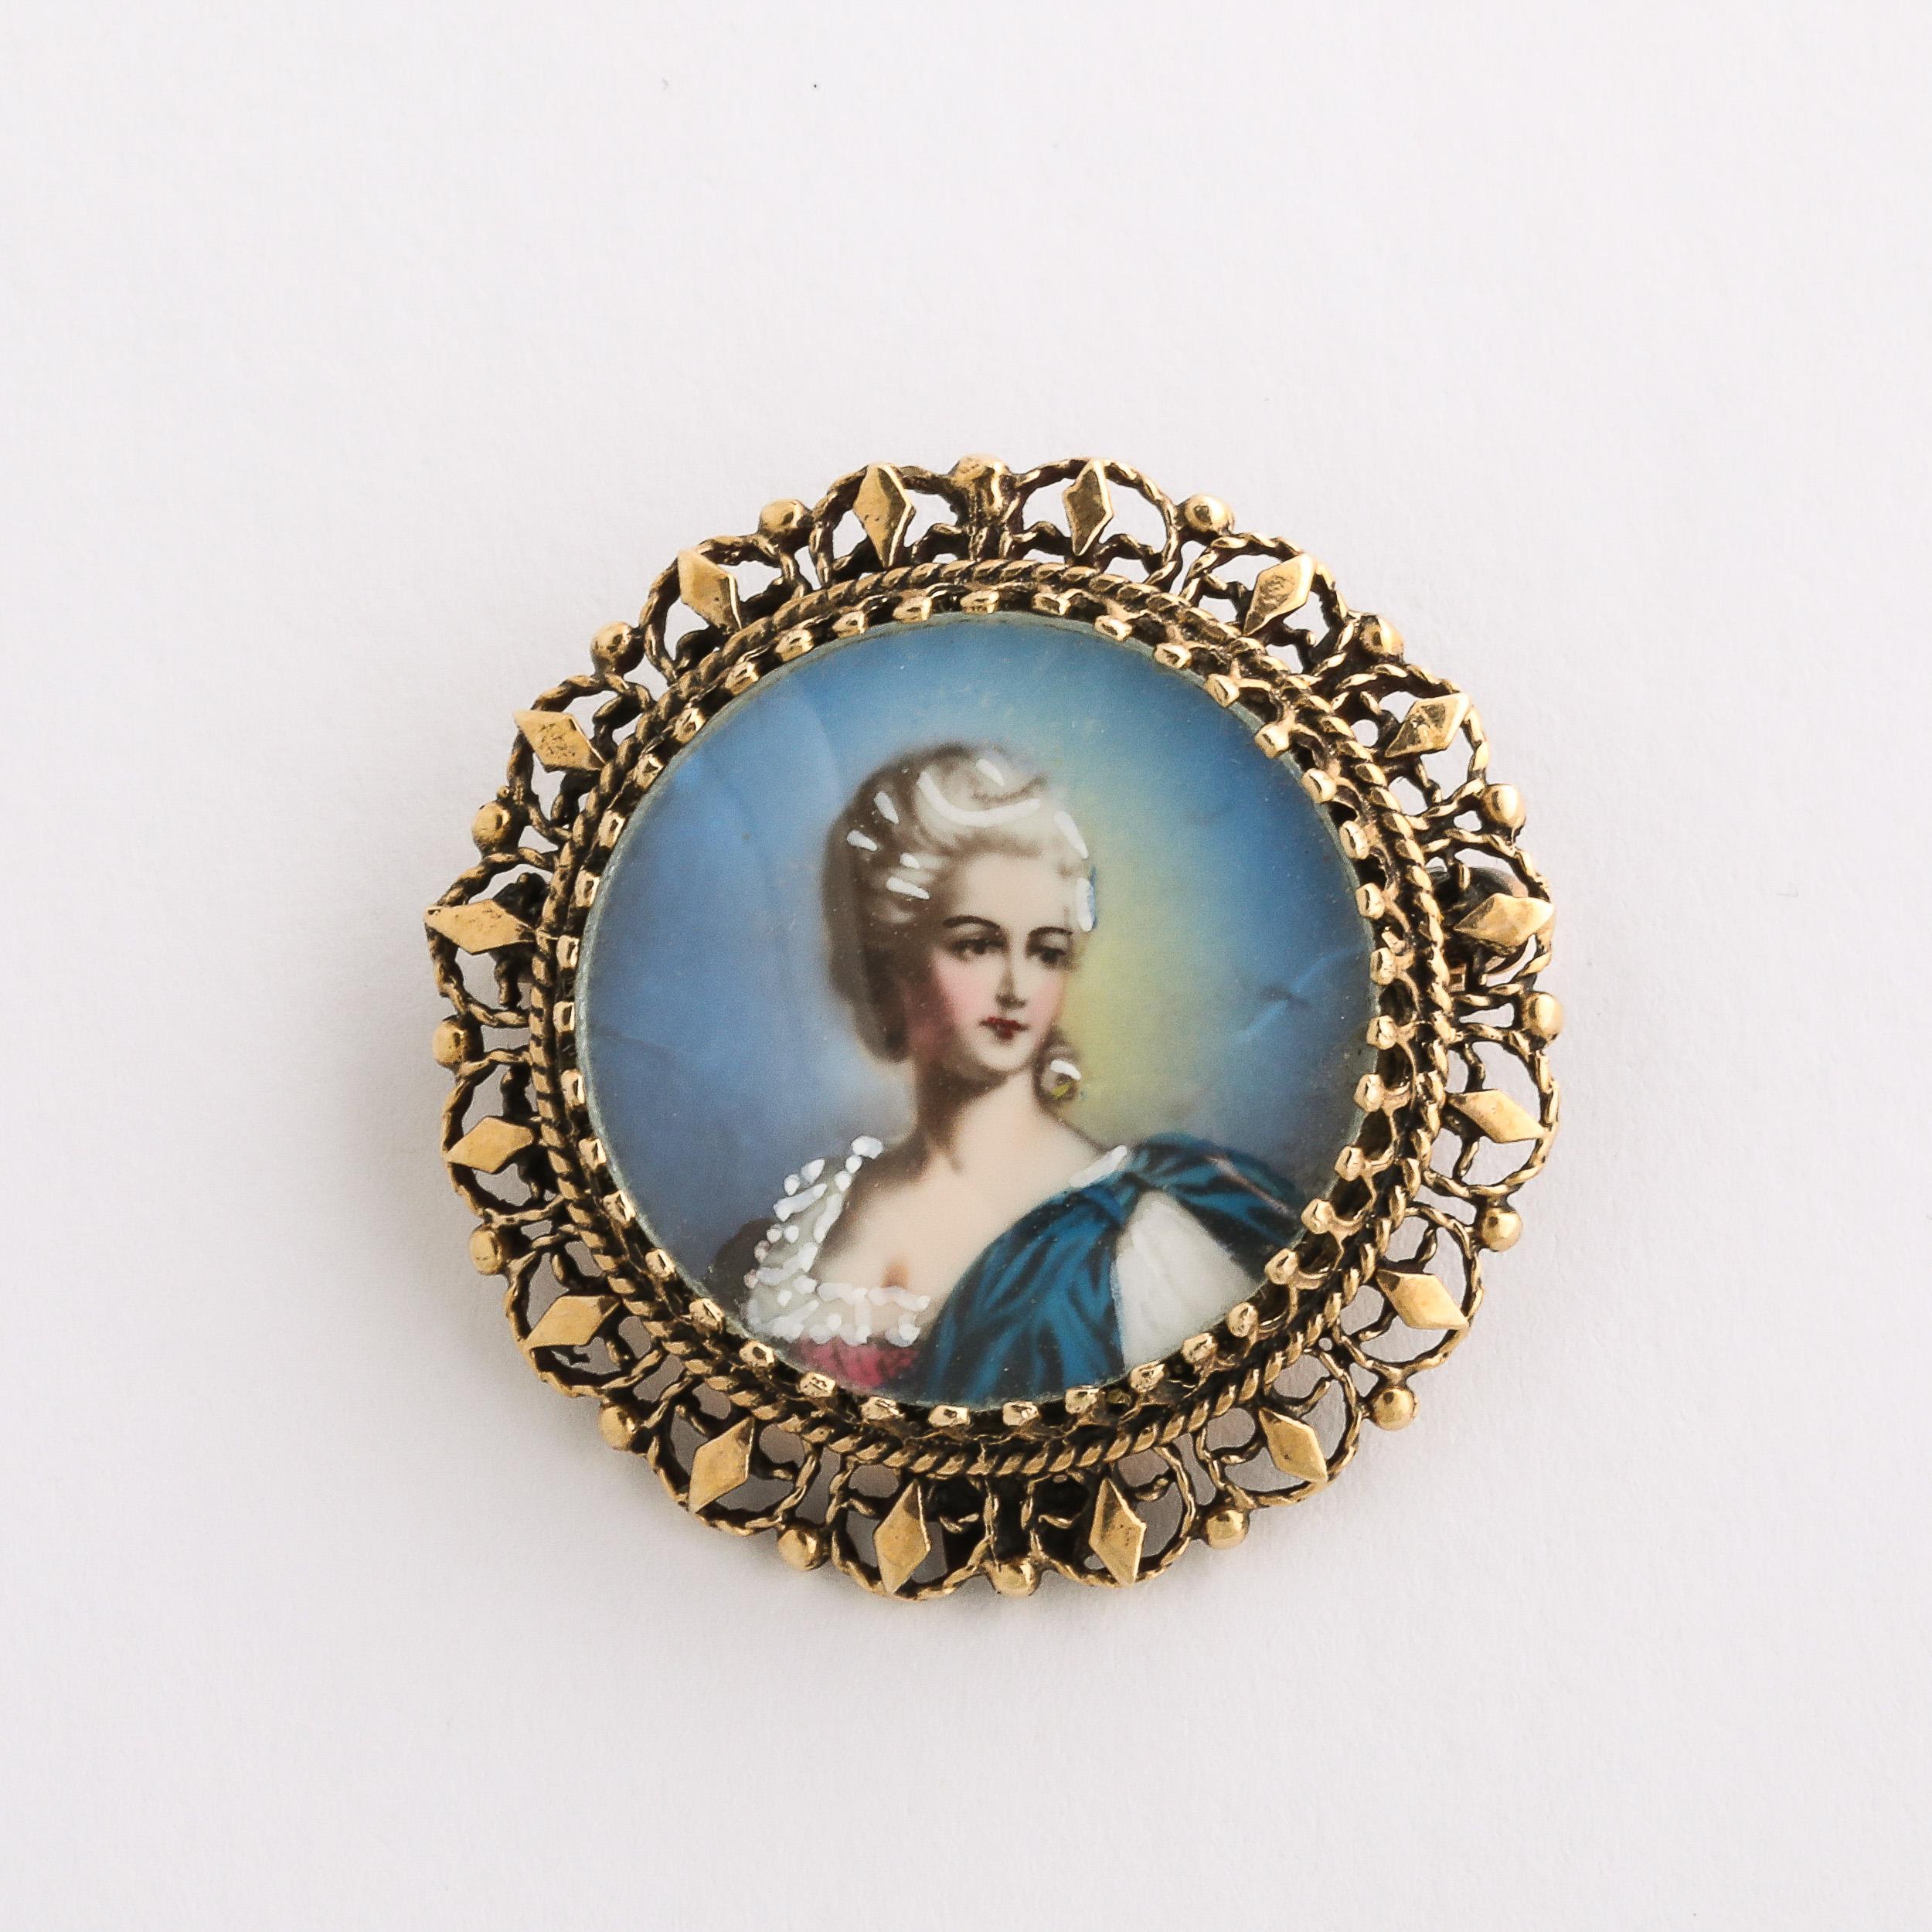 This Georgian Enameled & Hand-Painted Portrait Pin W/ 14 Karat Gold Setting is a lovely piece, classical and made with beautiful materials and detailing. This Pin features a portrait of a woman with coiffed hair and Georgian Style Dress, with